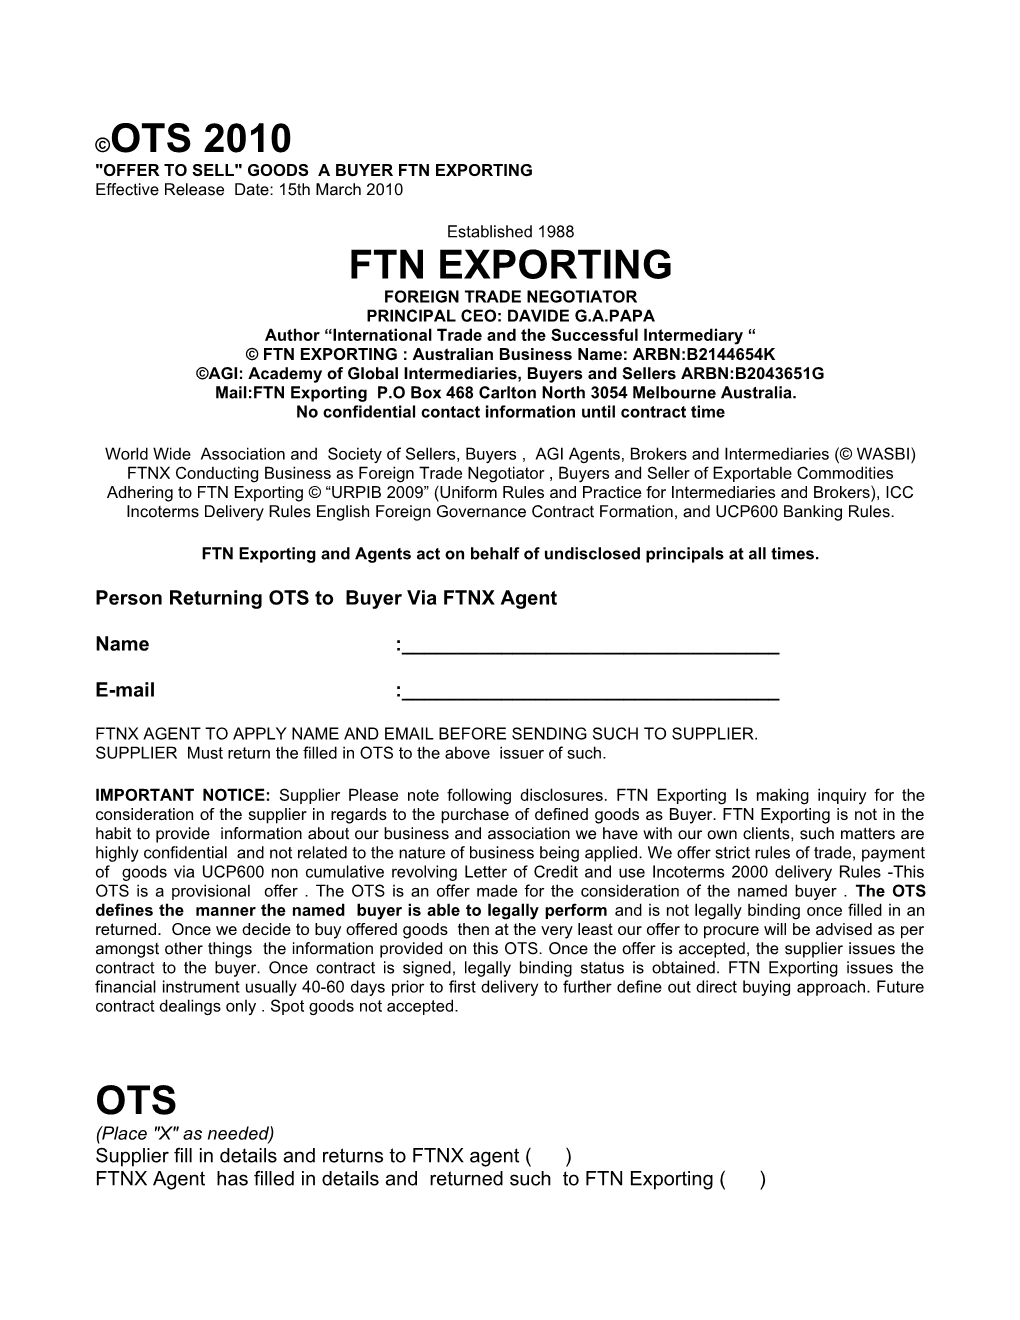 OTS 2010 OFFER to SELL GOODS a BUYER FTN EXPORTING Effective Release Date: 15Th March 2010